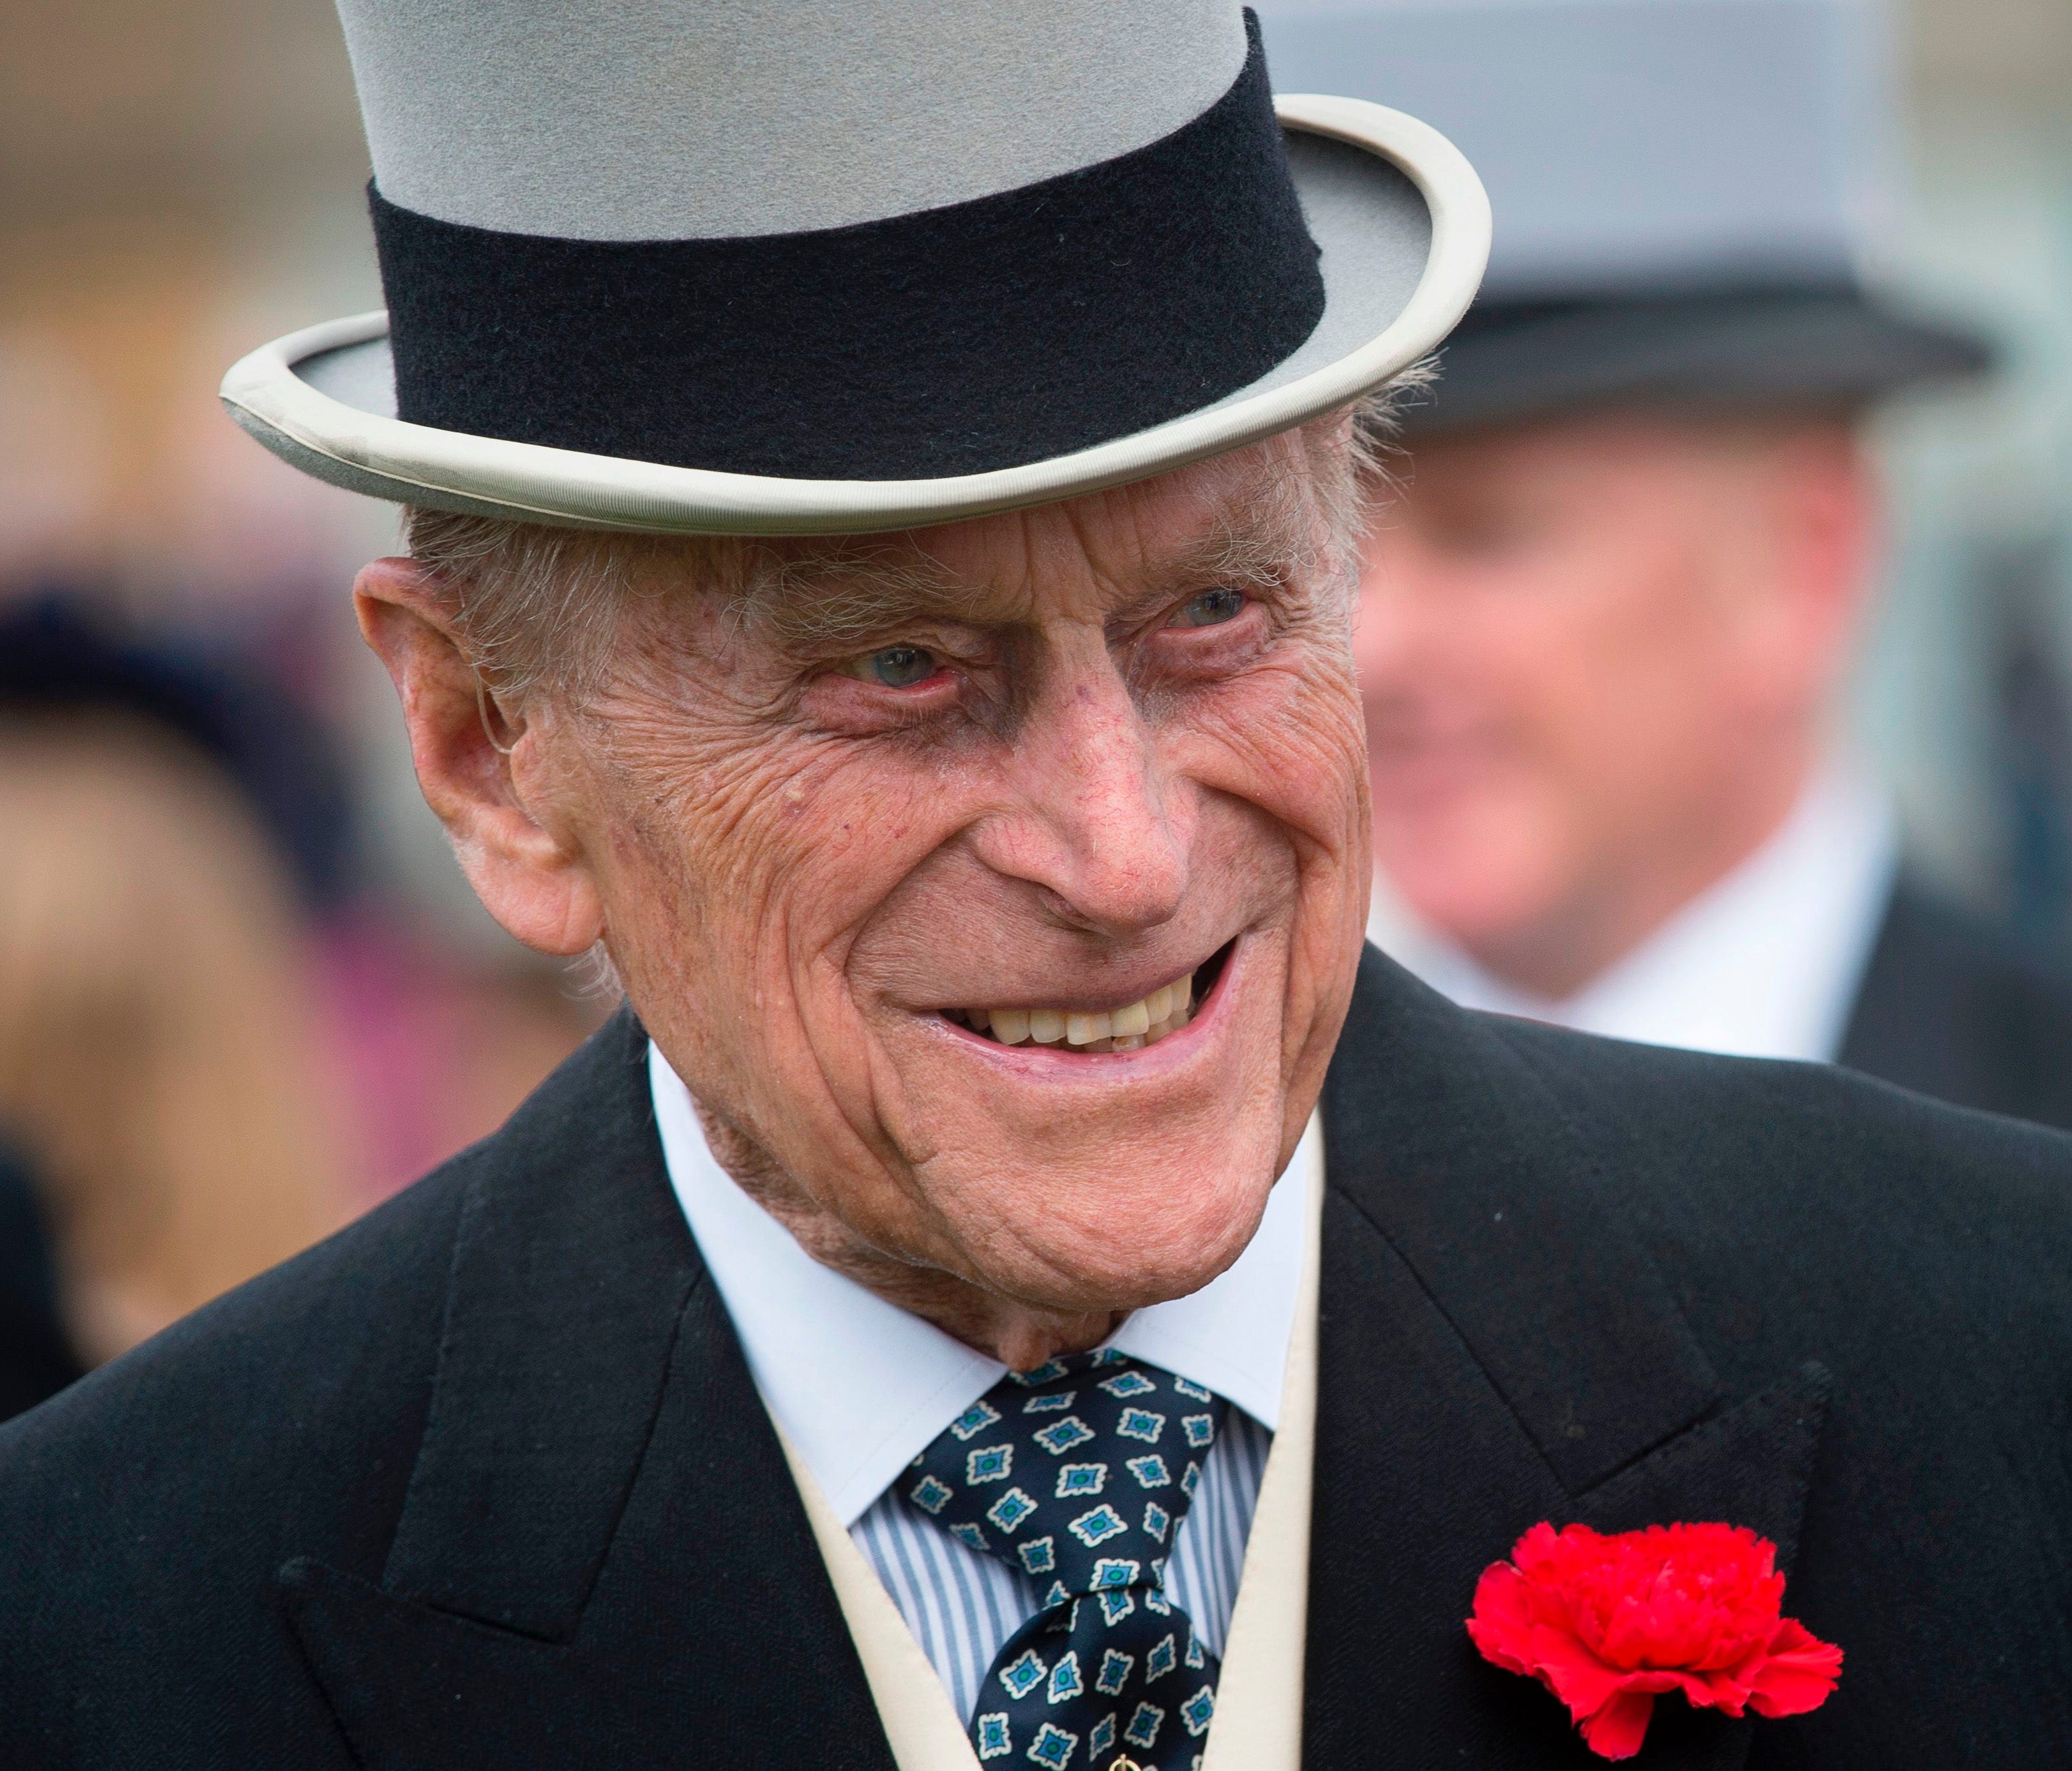 Britain's Prince Philip, Duke of Edinburgh greets guests at a garden party at Buckingham Palace in London on May 16, 2017.